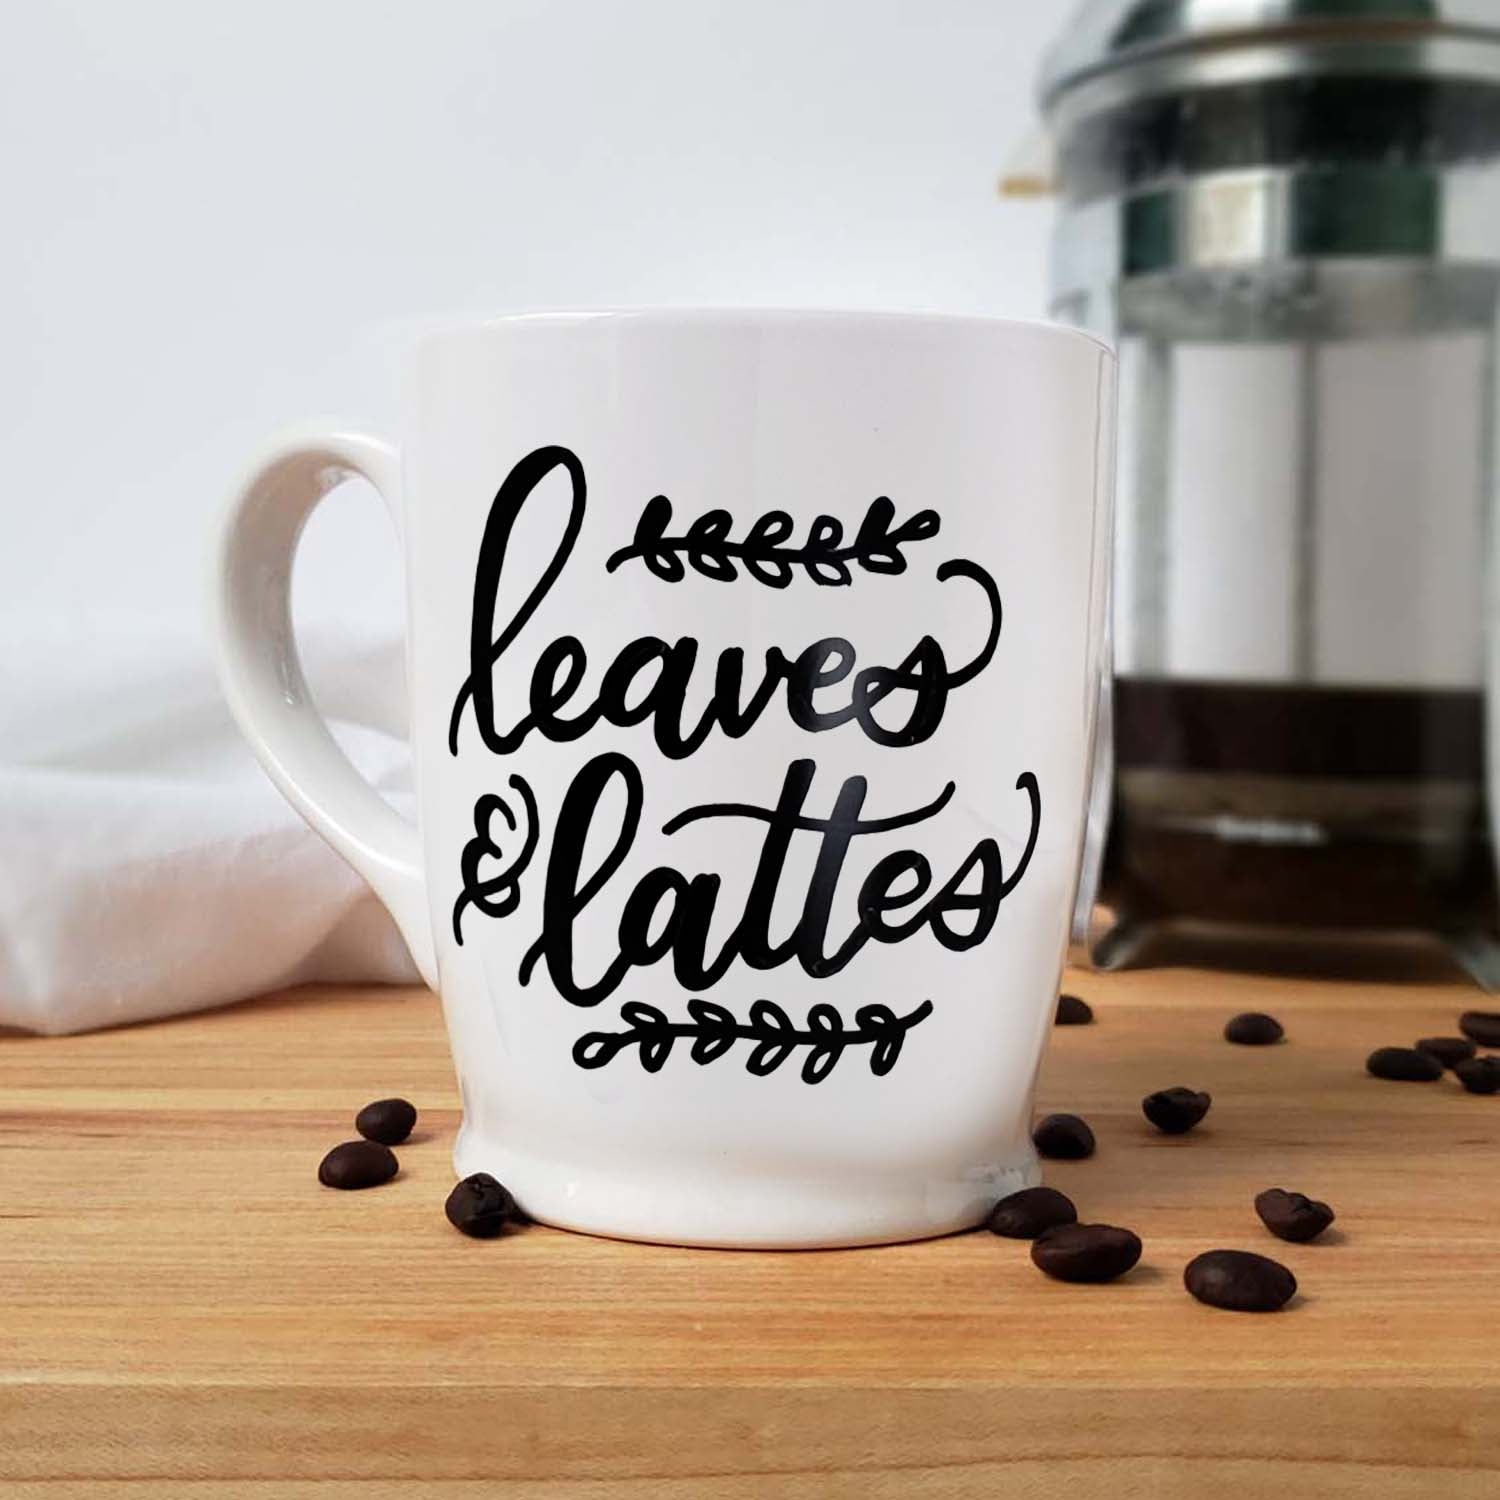 Hand painted white ceramic mug that says leaves & lattes with sprigs of leaves doodles shown on a kitchen counter with a french press, towel and scattered coffee beans